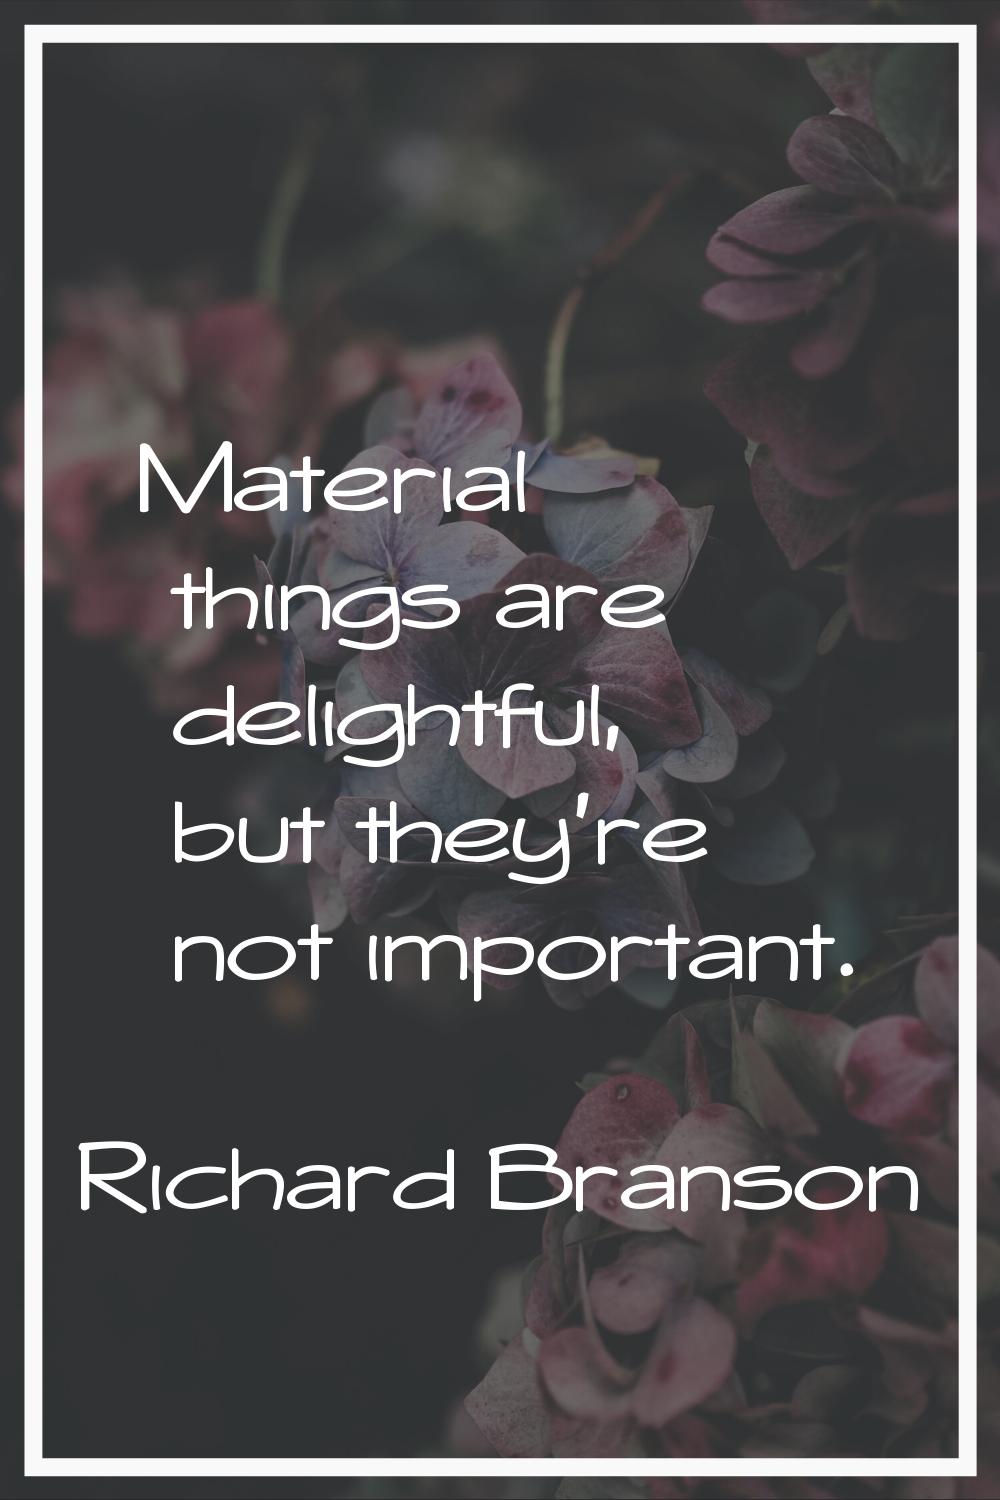 Material things are delightful, but they're not important.